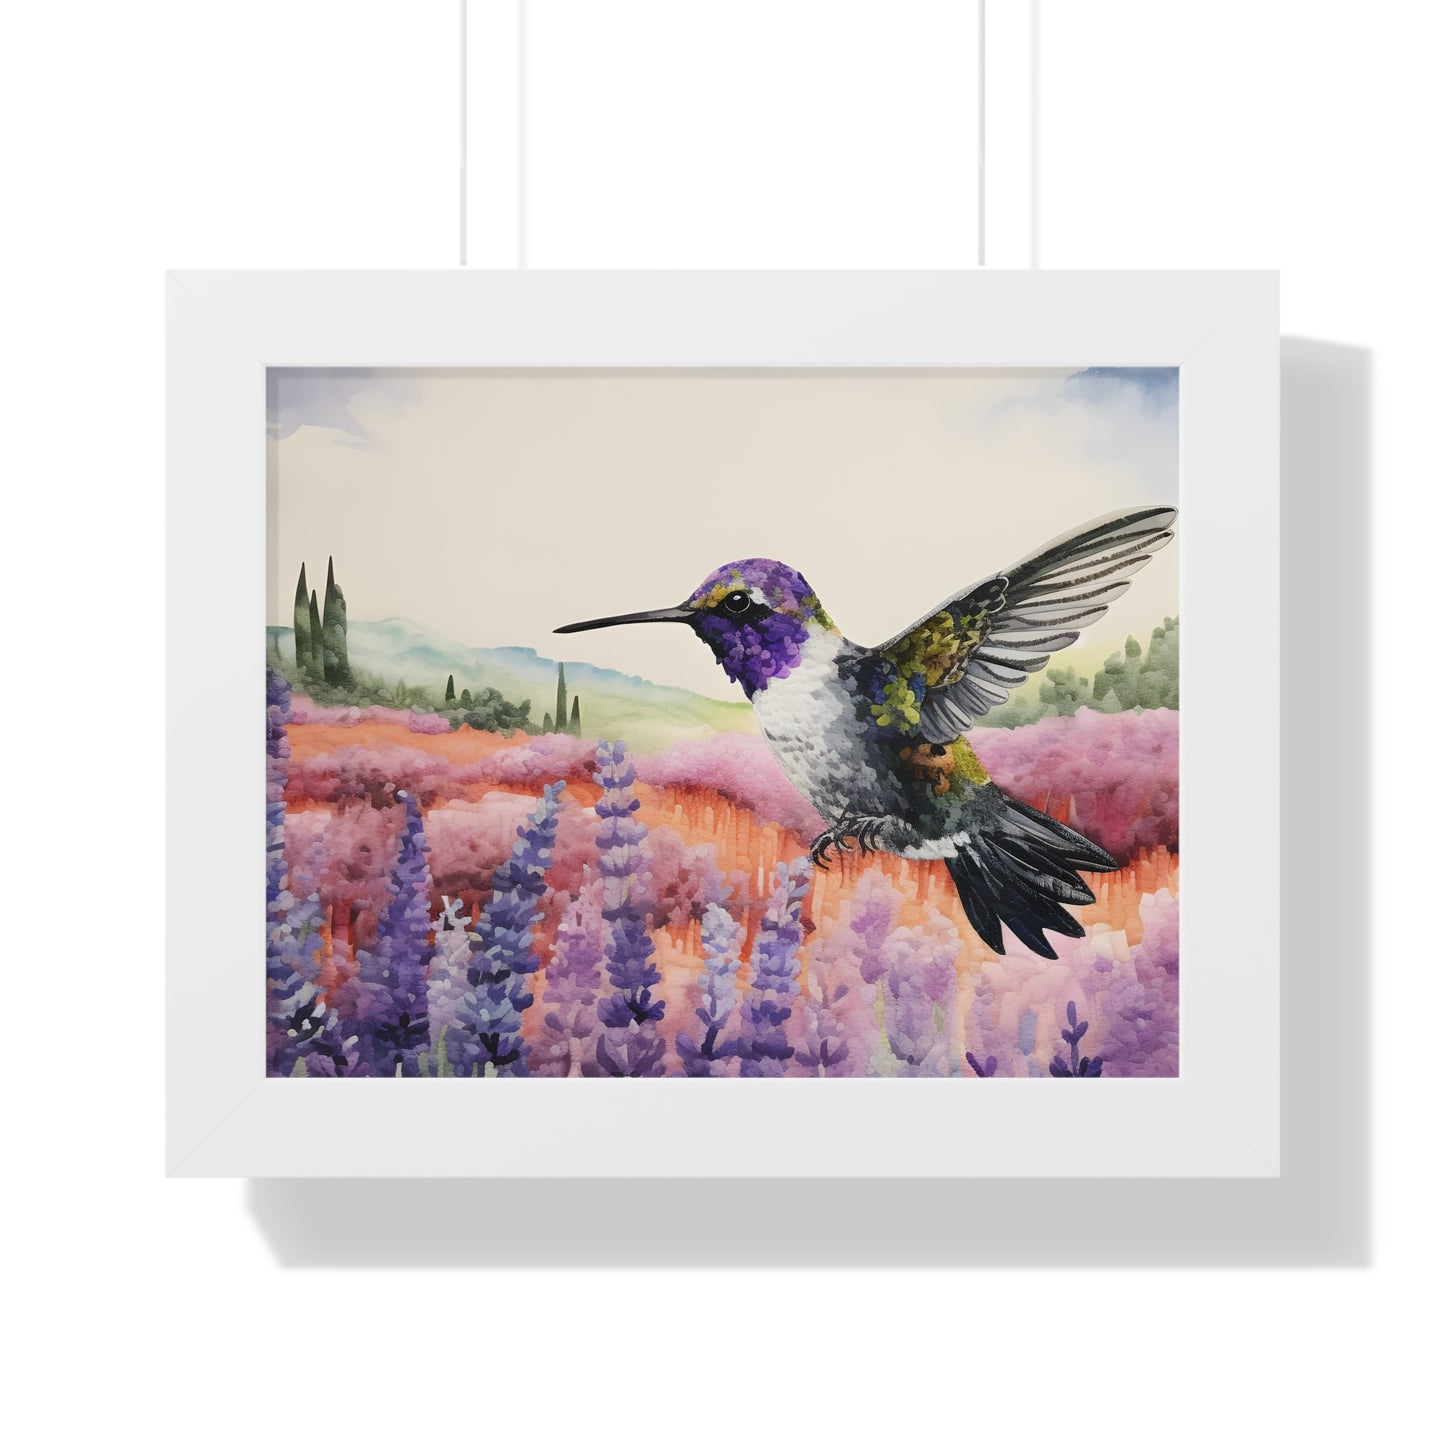 Threaded Wings: A humming's birds dance in a lavender field (Series 1)